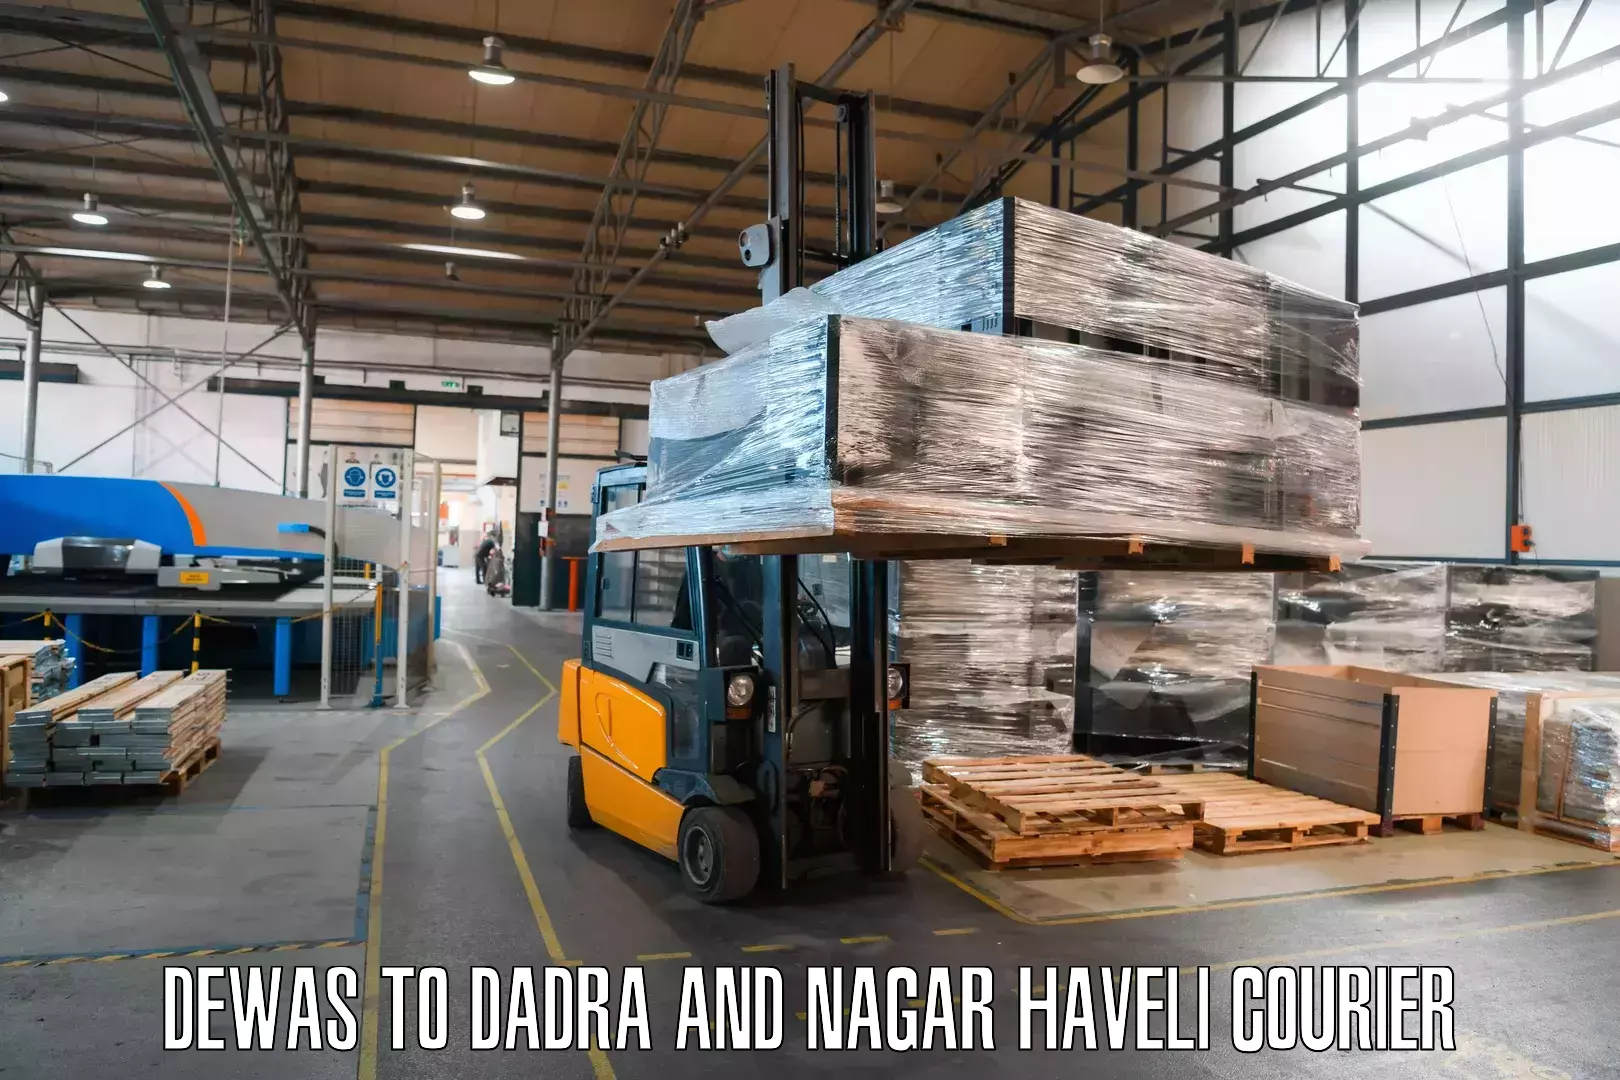 Parcel handling and care Dewas to Dadra and Nagar Haveli